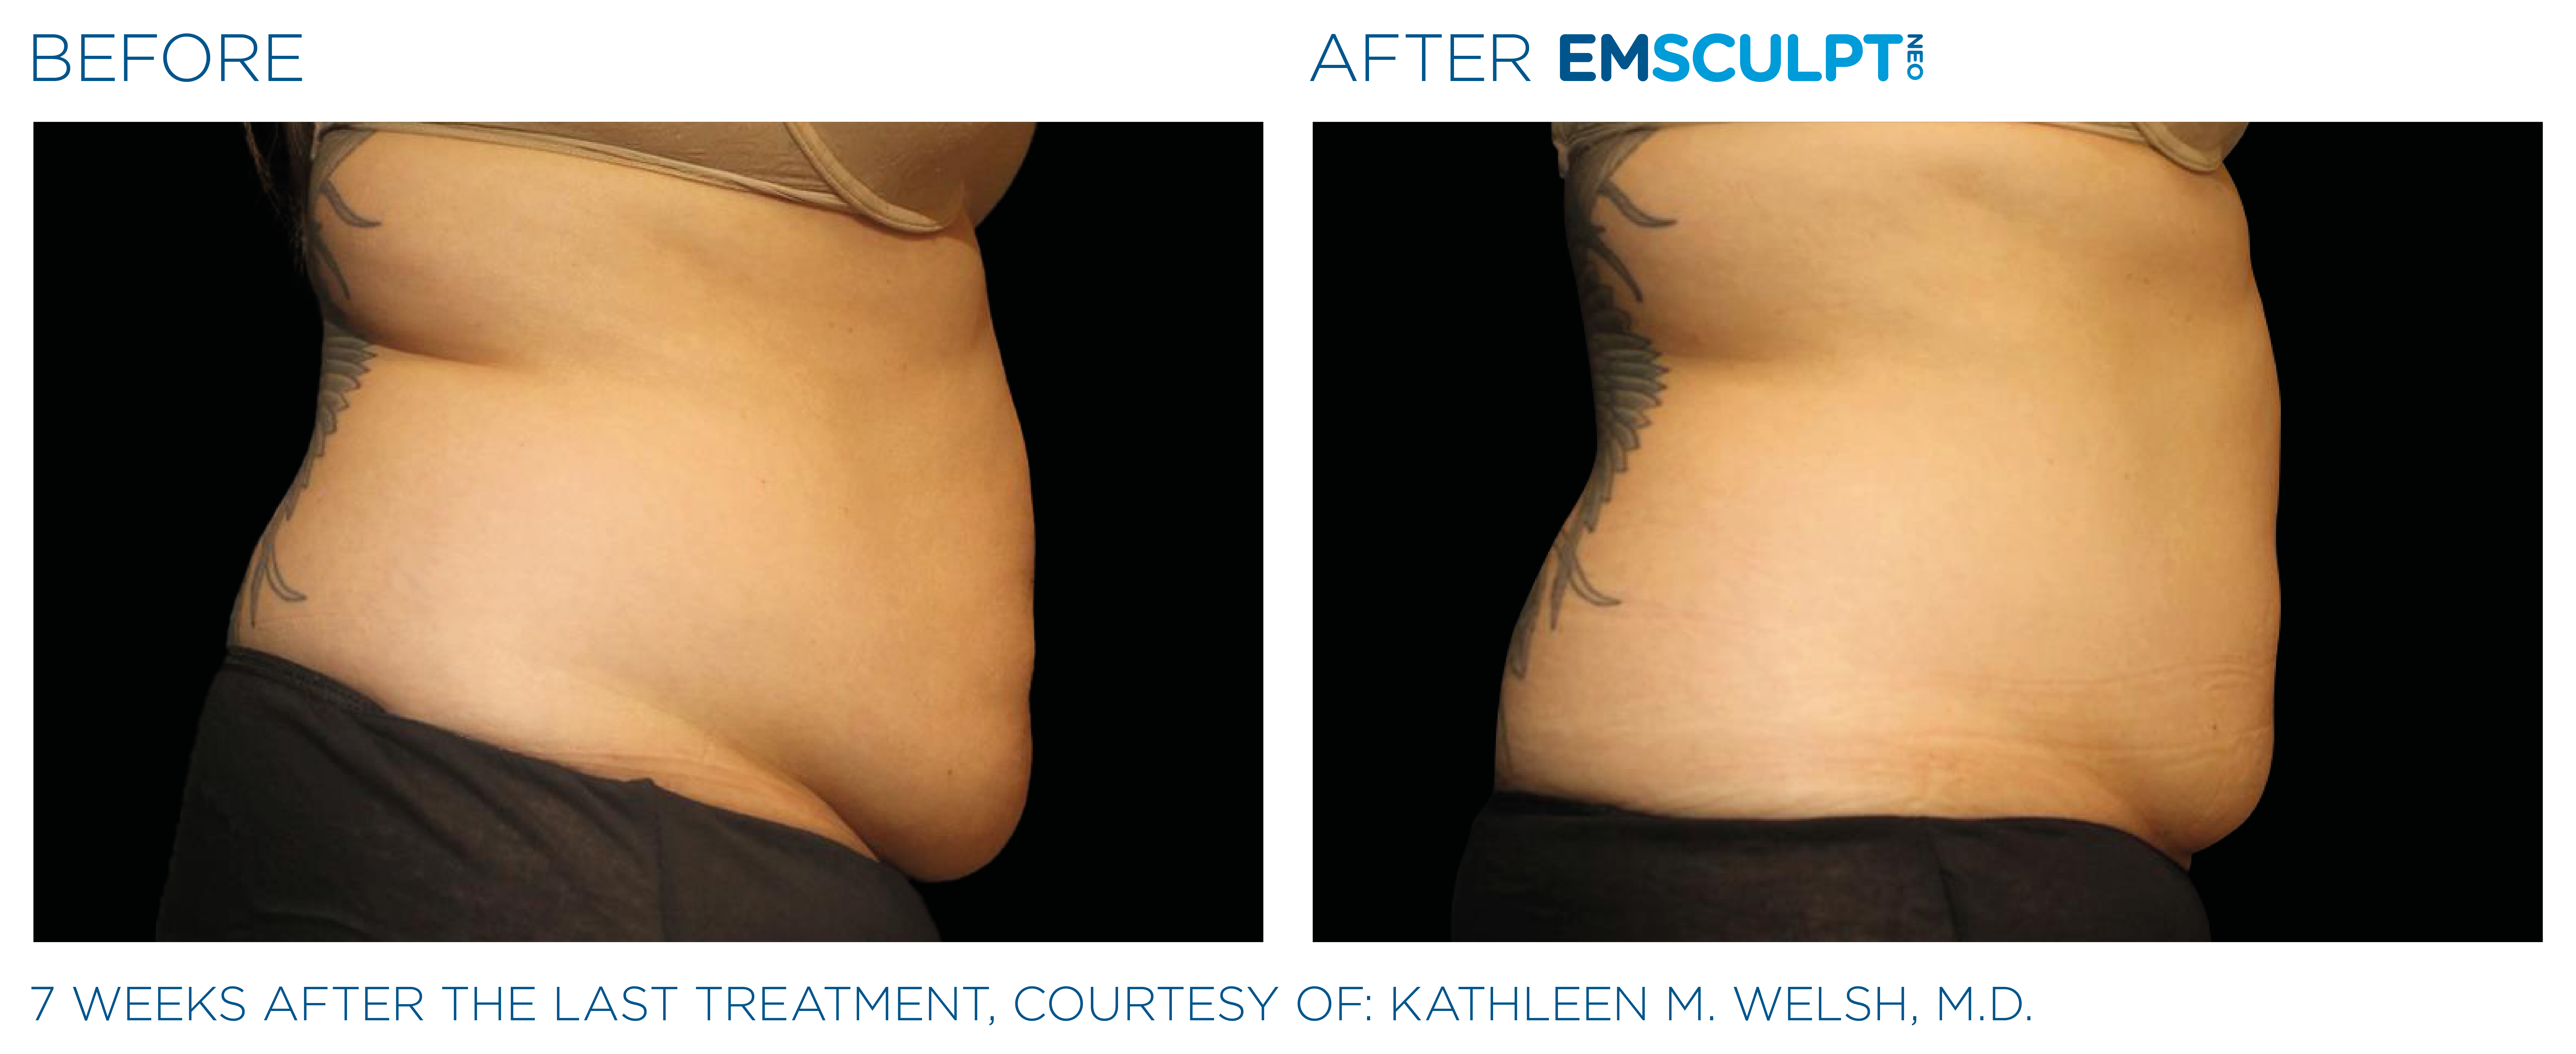 Reduce belly fat and strengthen core with Emsculpt Neo in Seattle